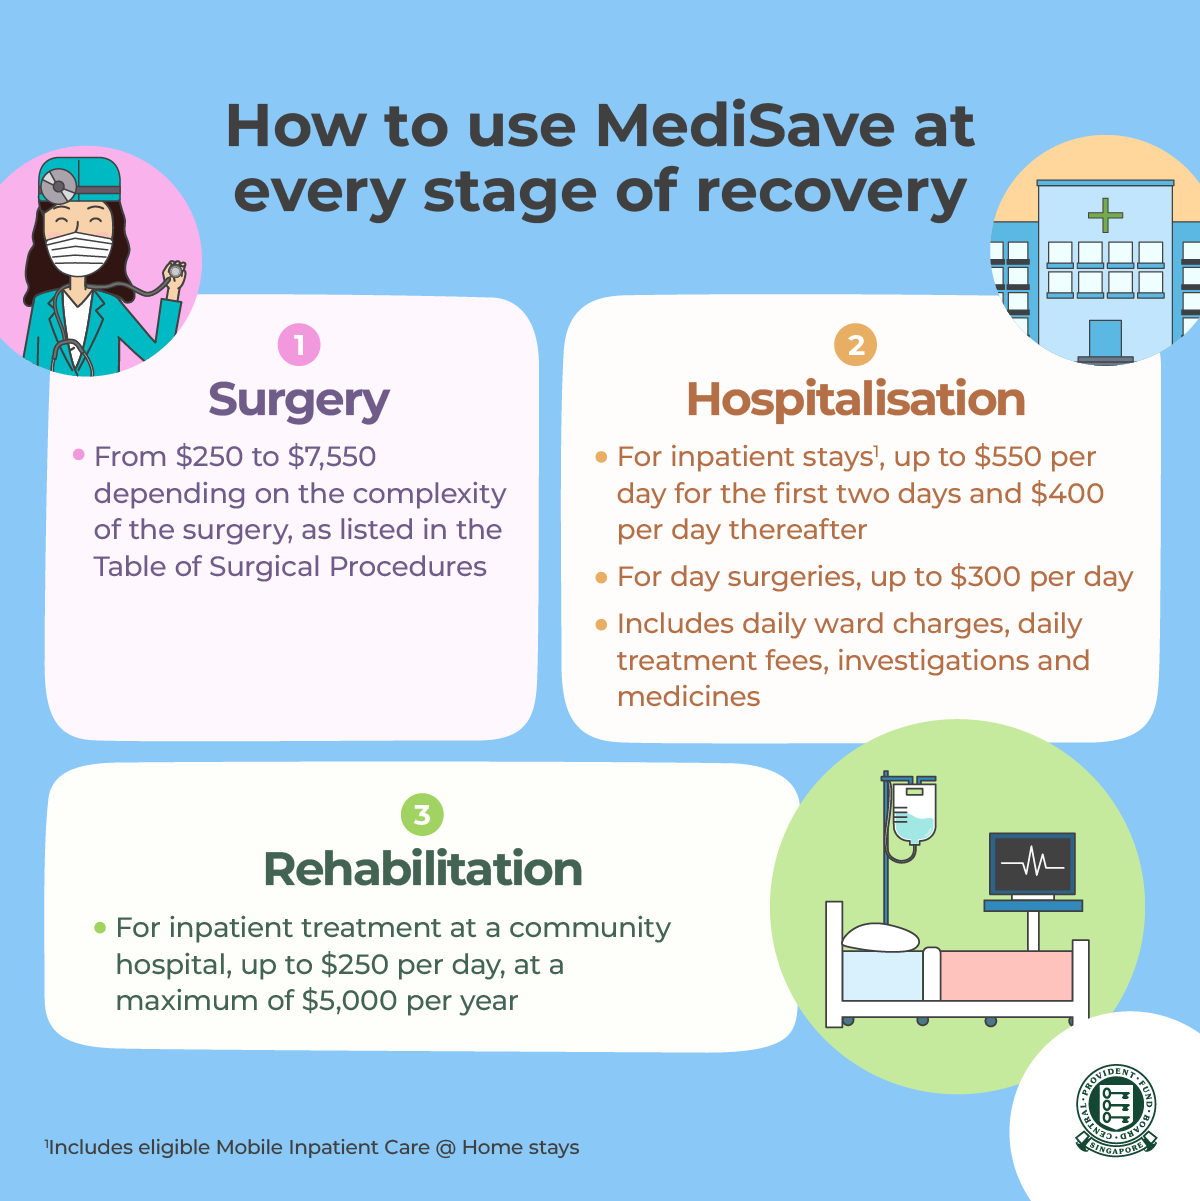 Types of hospital charges covered under MediSave